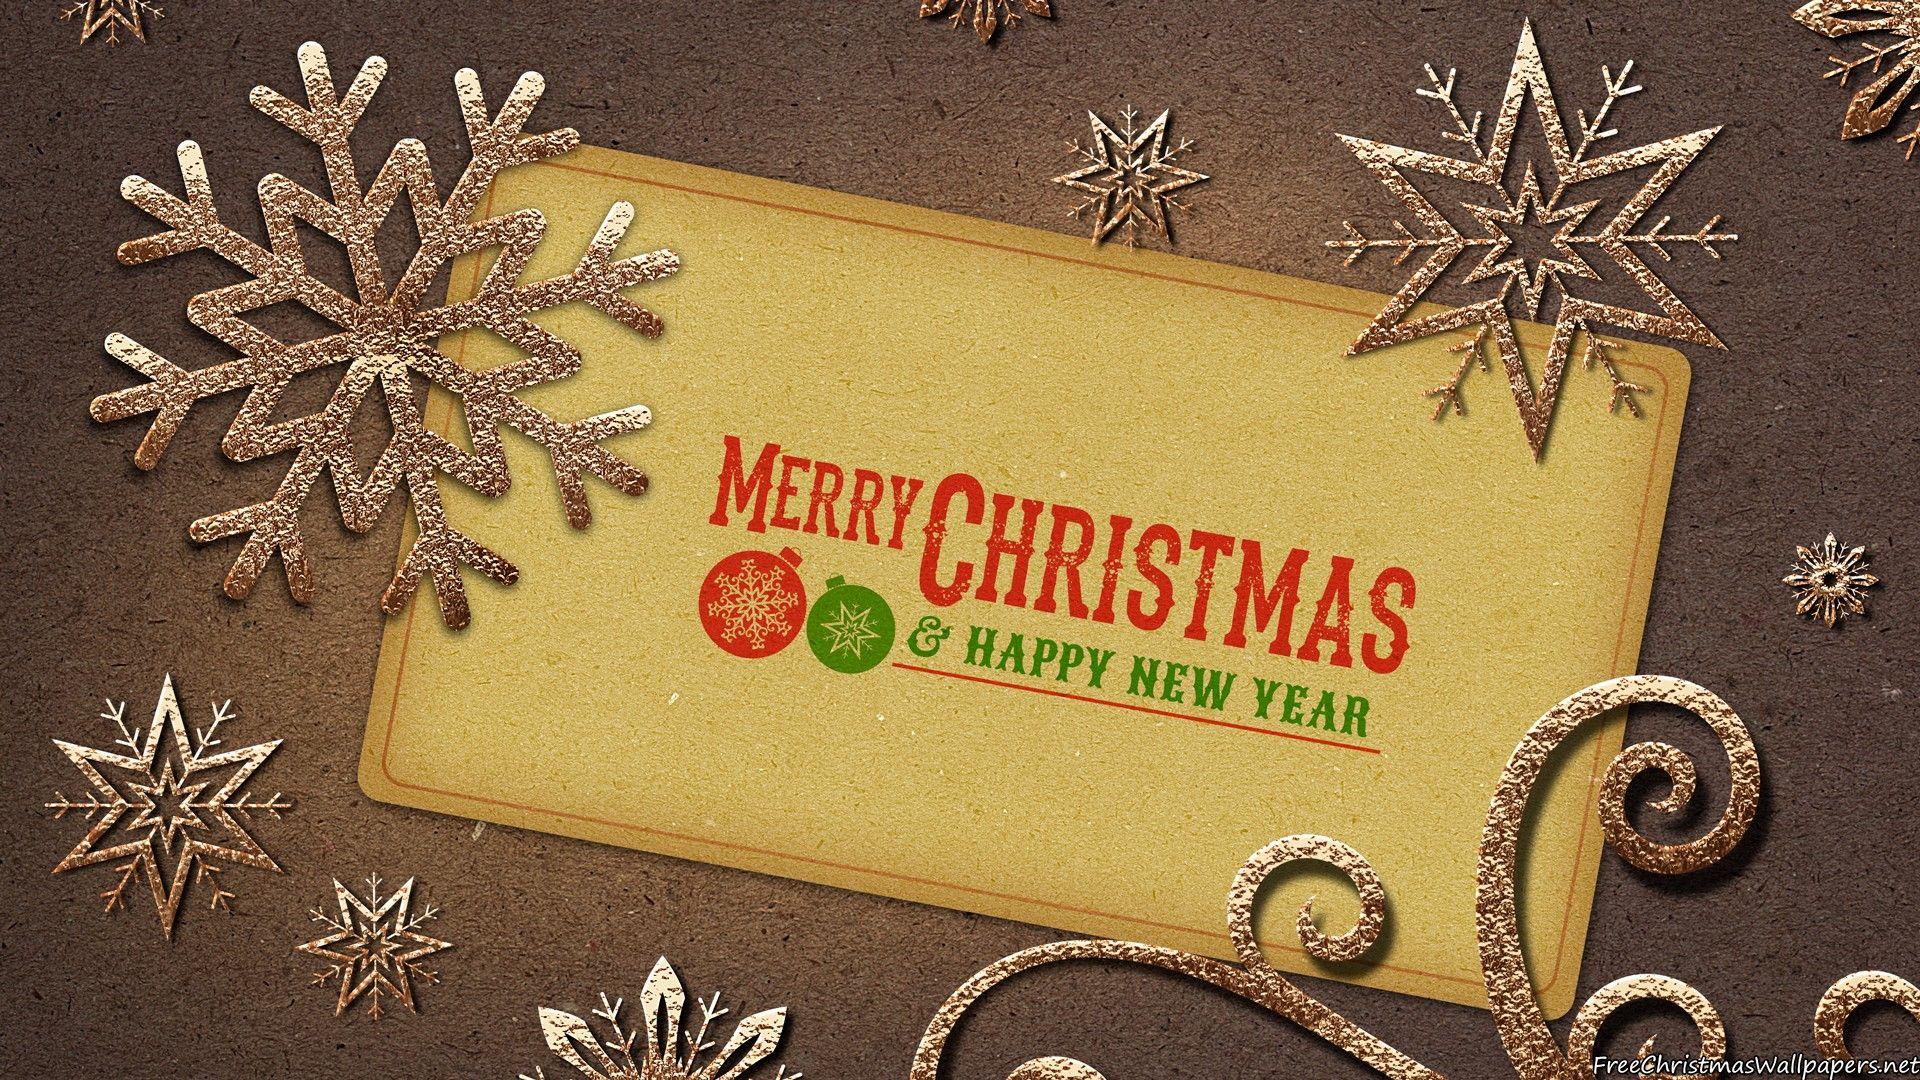 Vintage Merry Christmas Note 1920x1080 (1080p)